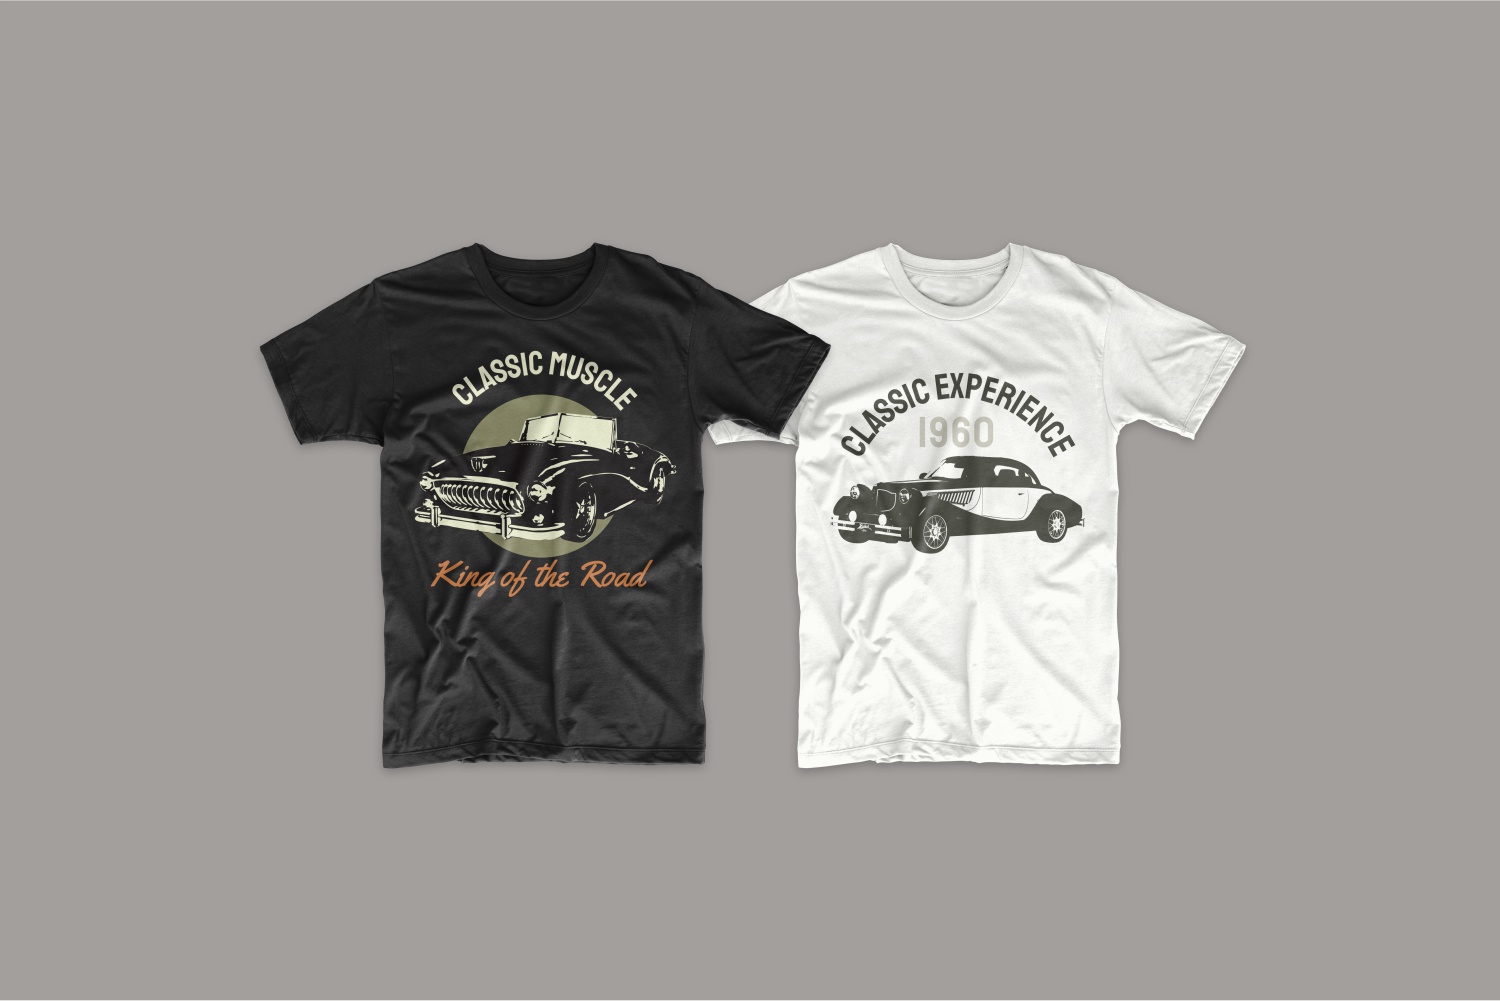 Two T-shirts - black and white with vintage cars.